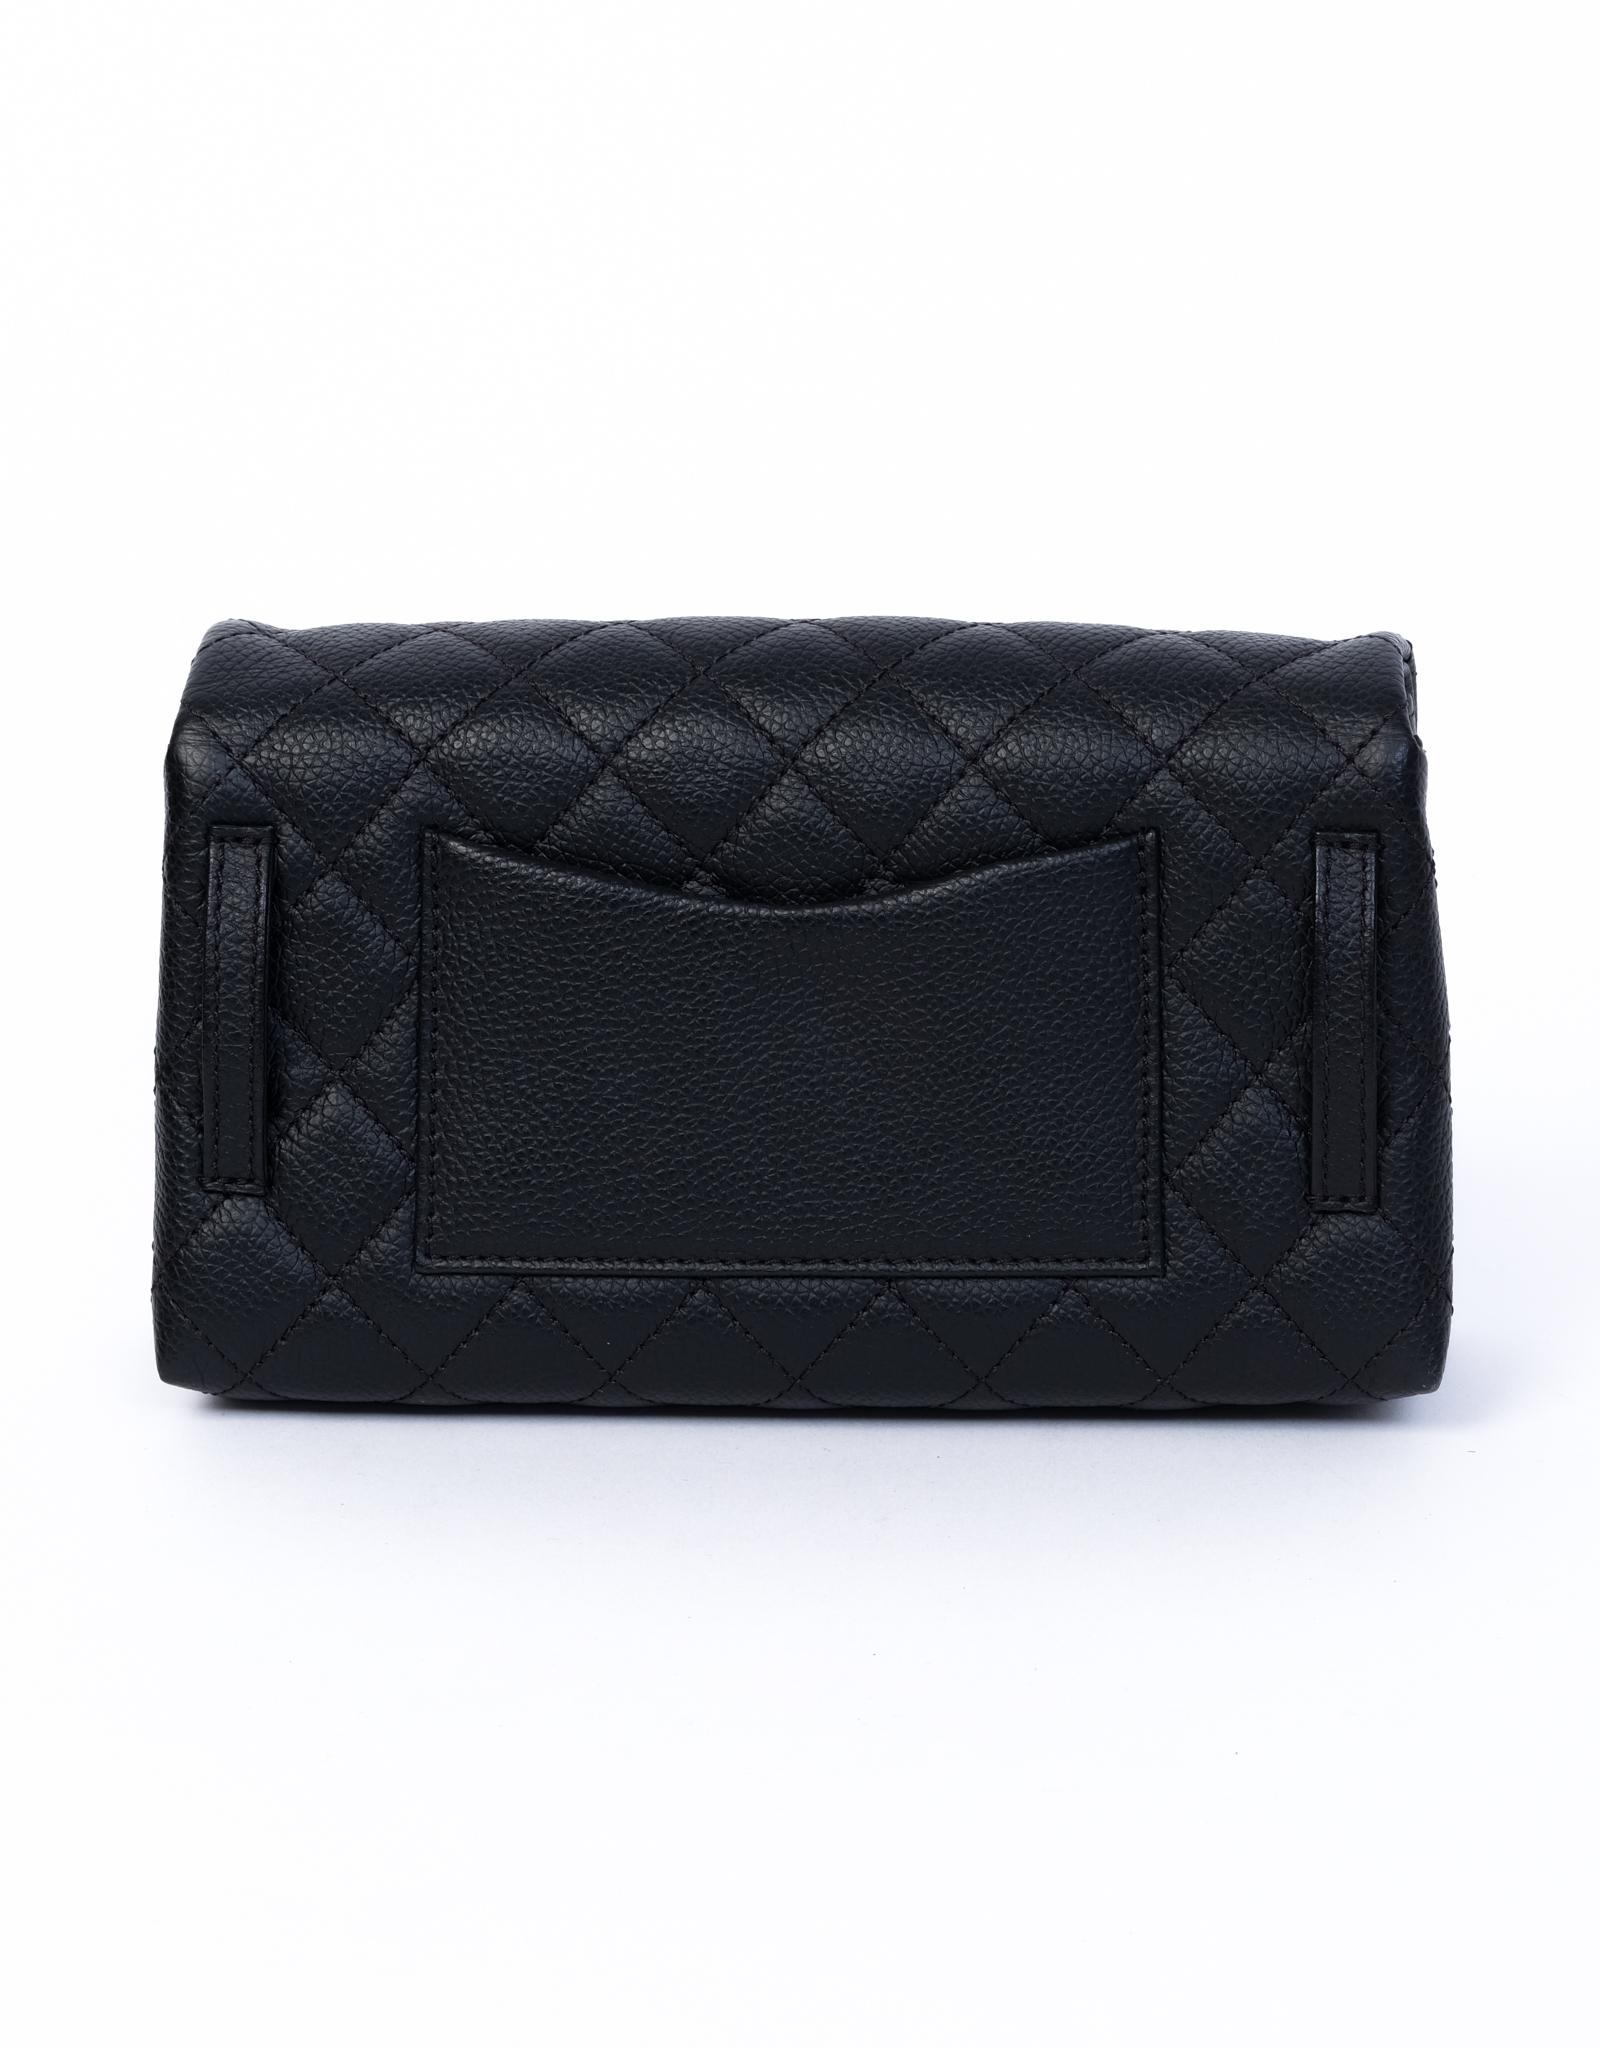 The Chanel Employee Reissue Belt Bag features a black caviar leather exterior in a quilted diamond pattern, a squared silver turn closure, an open interior, and a rear half moon slip pocket. Chanel bags with the serial number 20XXXXXX are